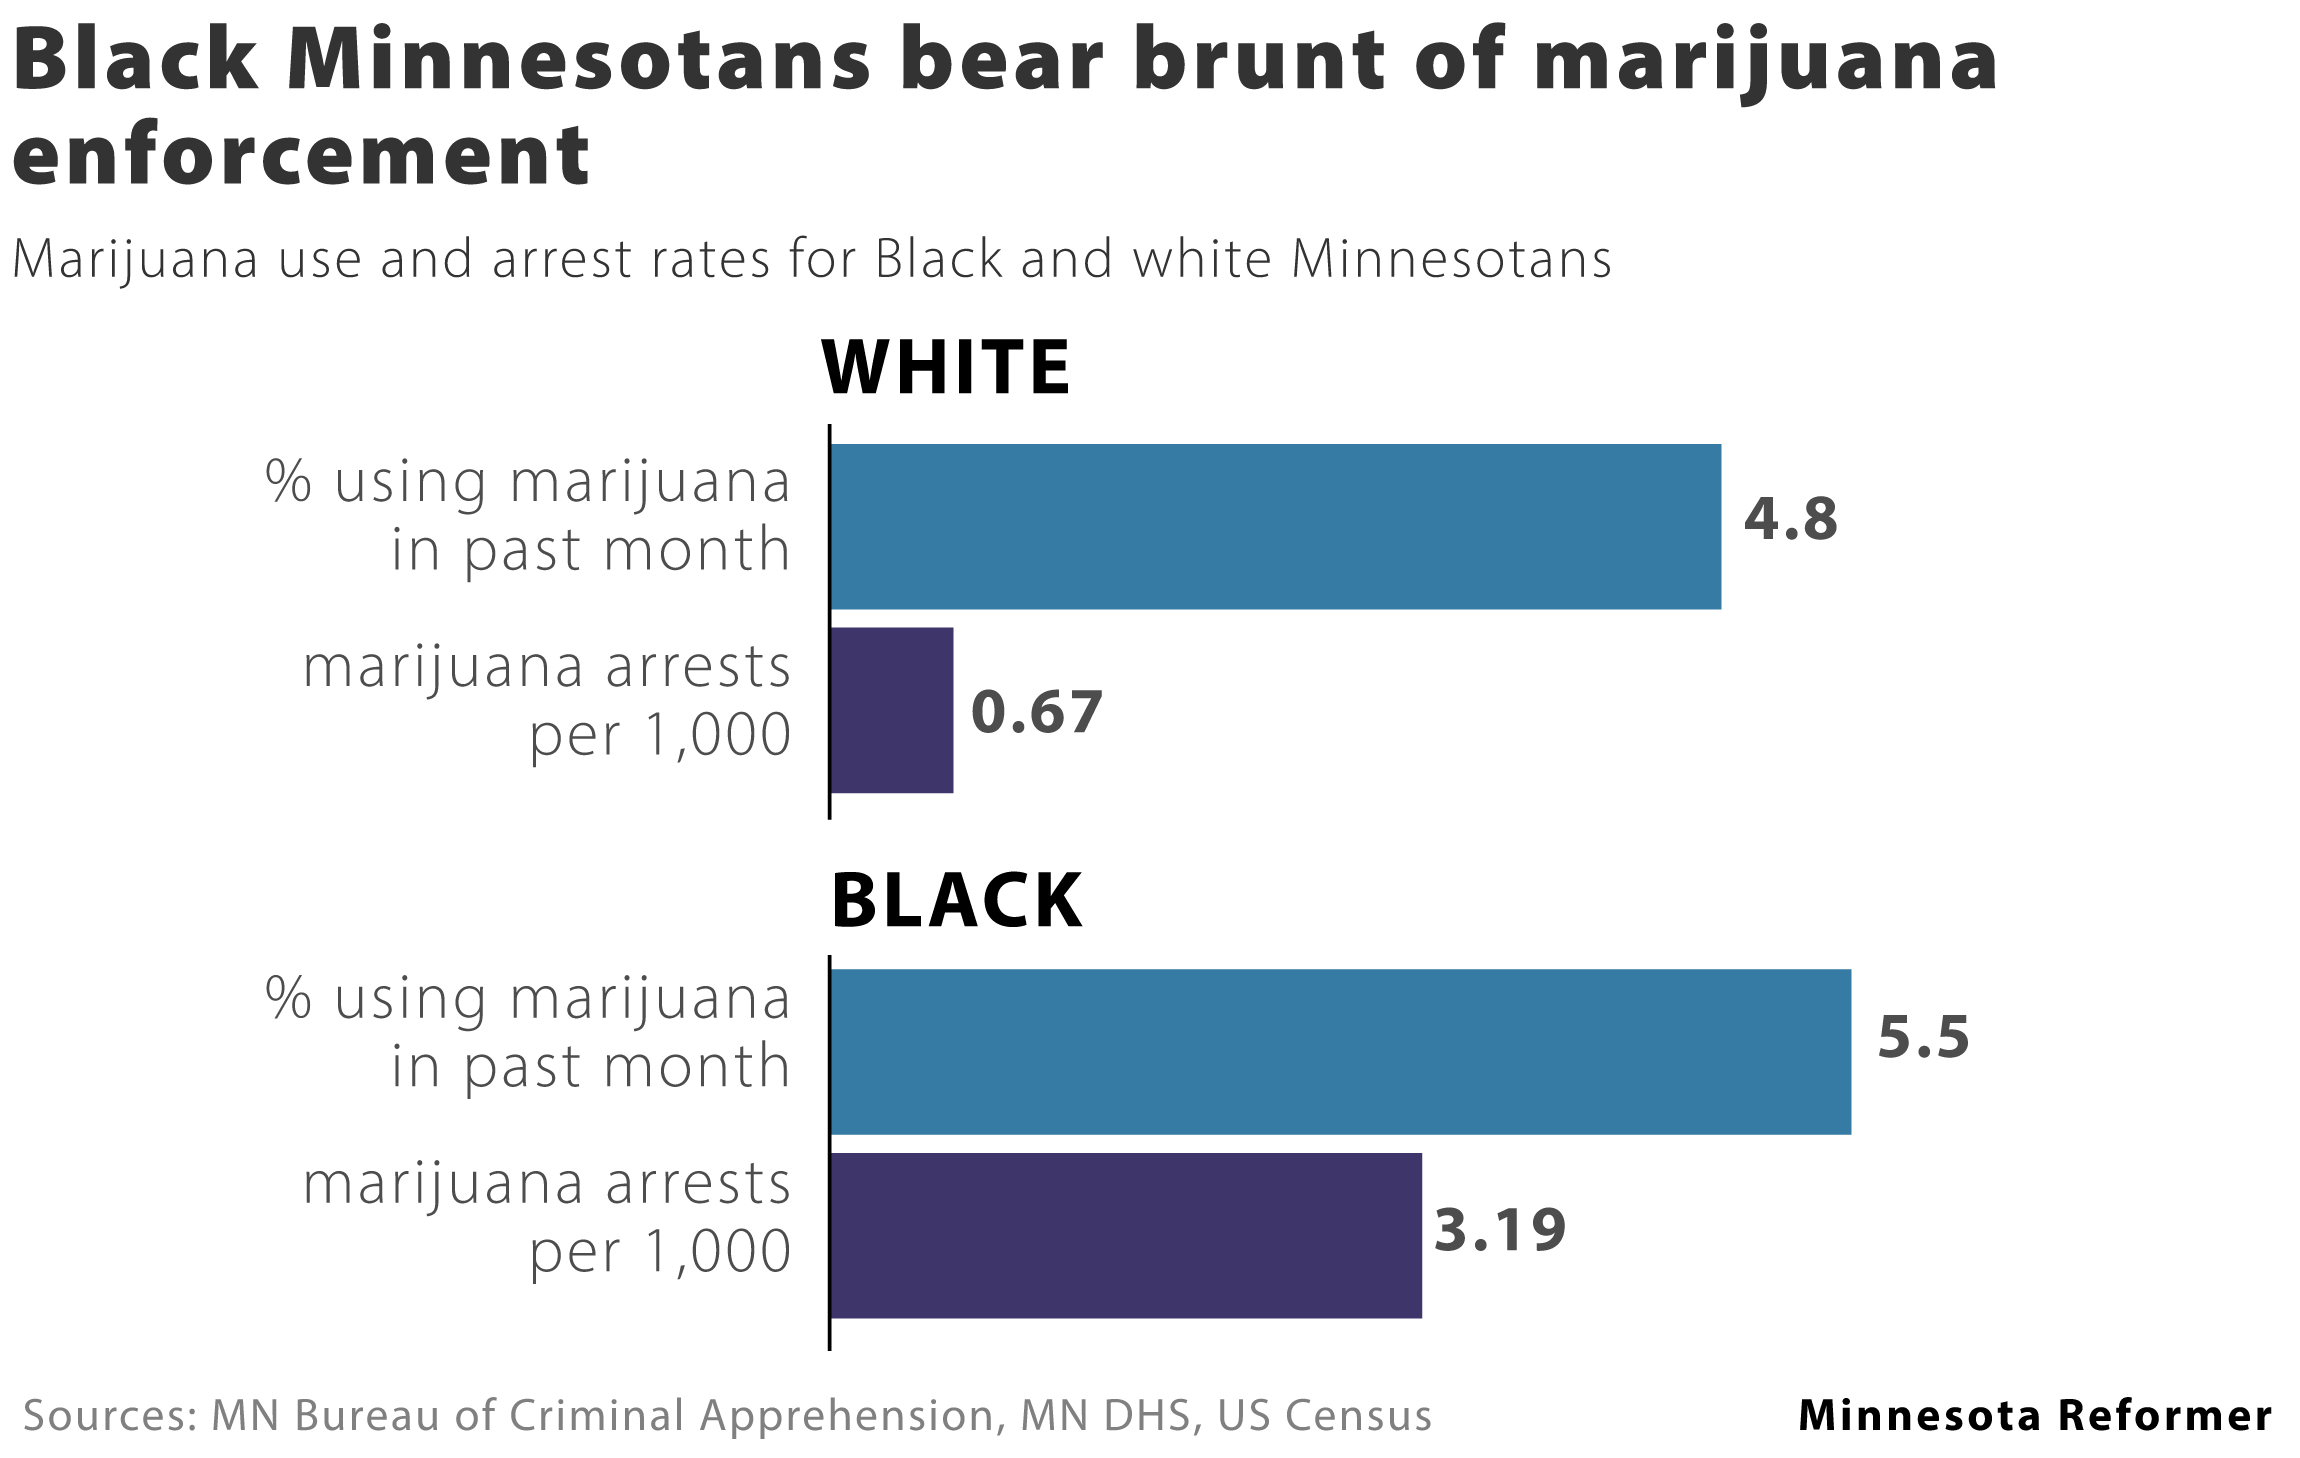 Black/white marijuana use and arrest rates in MN